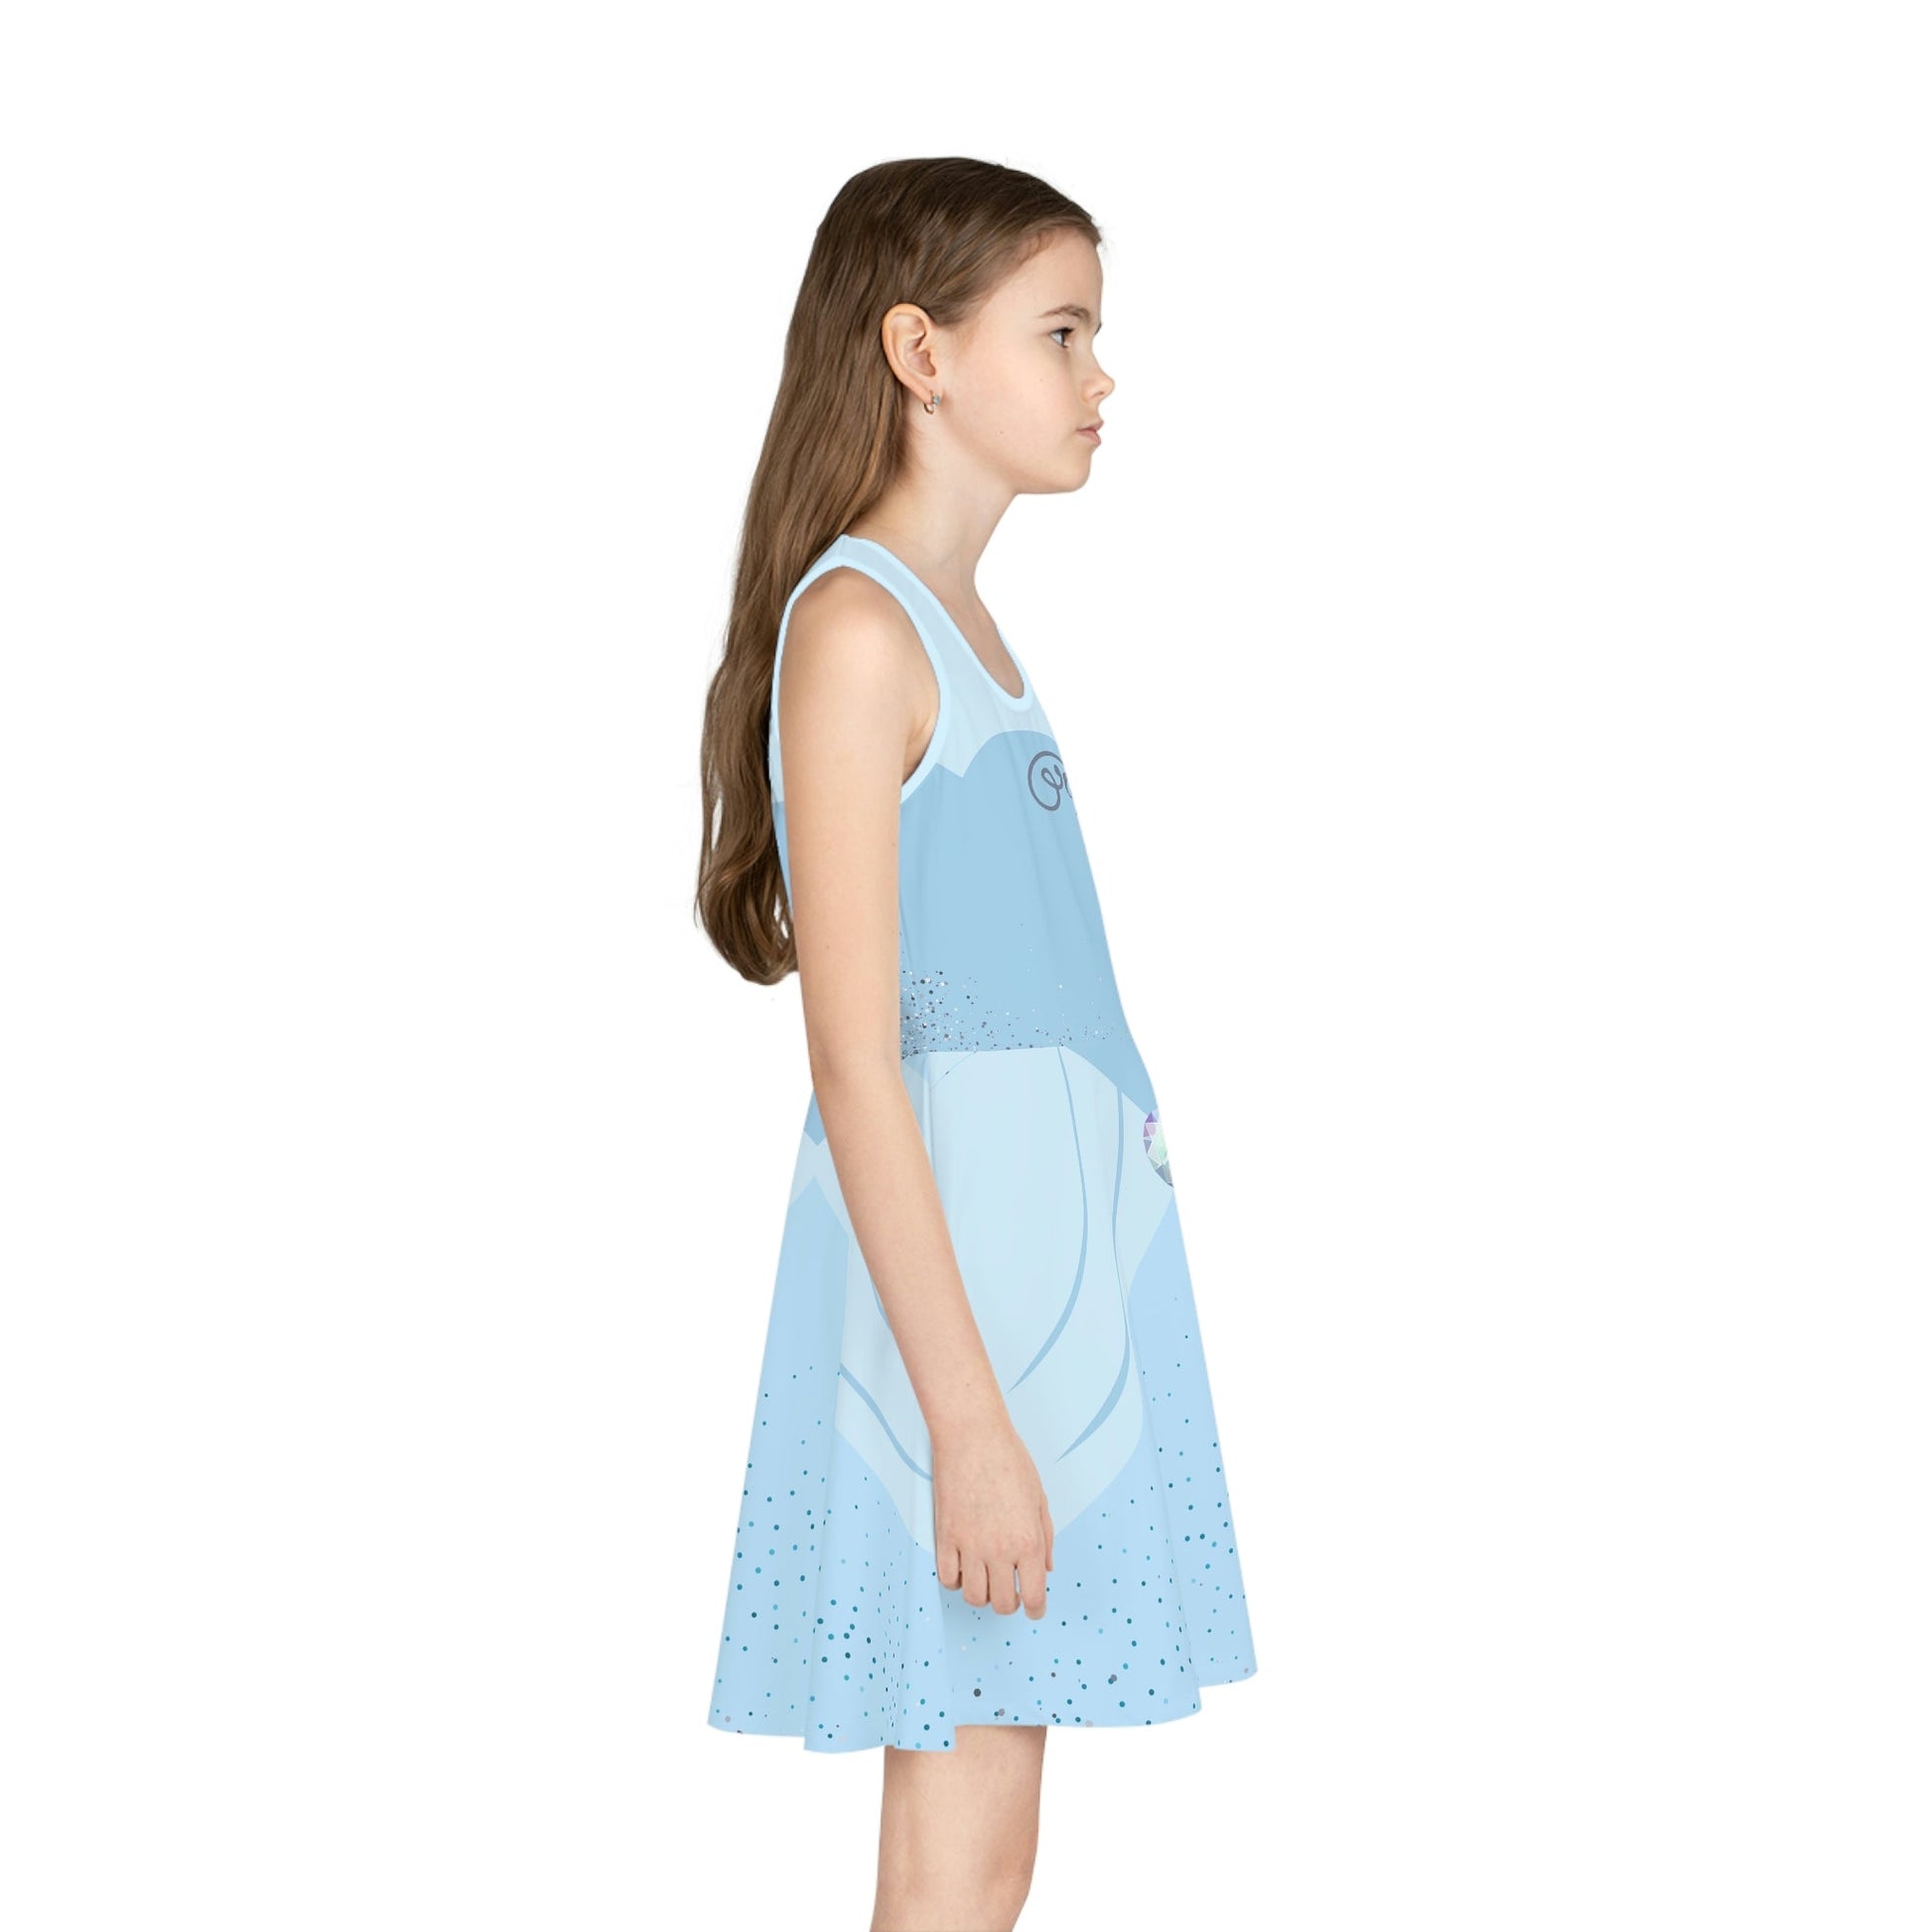 Does the Shoe Fit? Girls' Sleeveless Sundress All Over PrintAOPAOP Clothing#tag4##tag5##tag6#